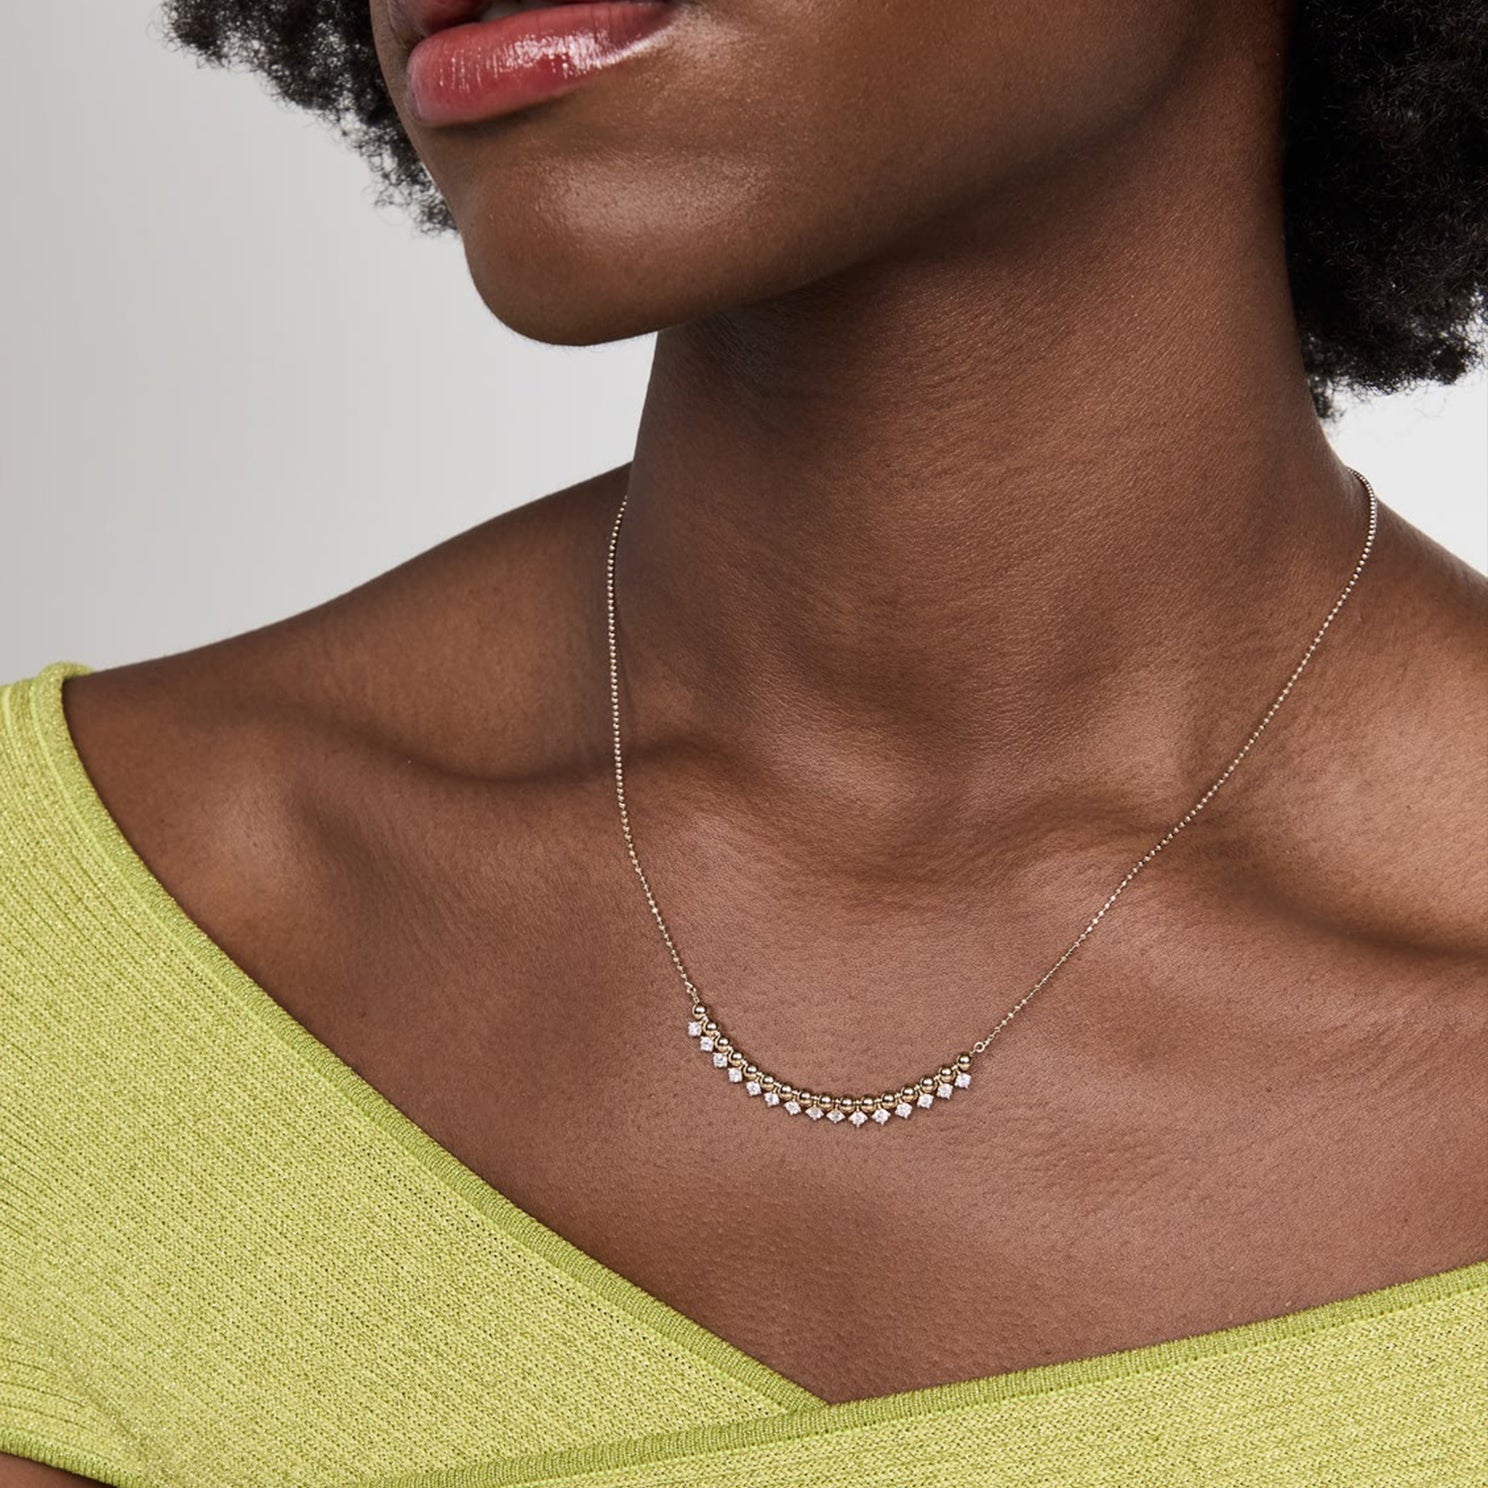 Diamond & Gold Ball Necklace in 14k yellow gold styled on neck of model wearing green top